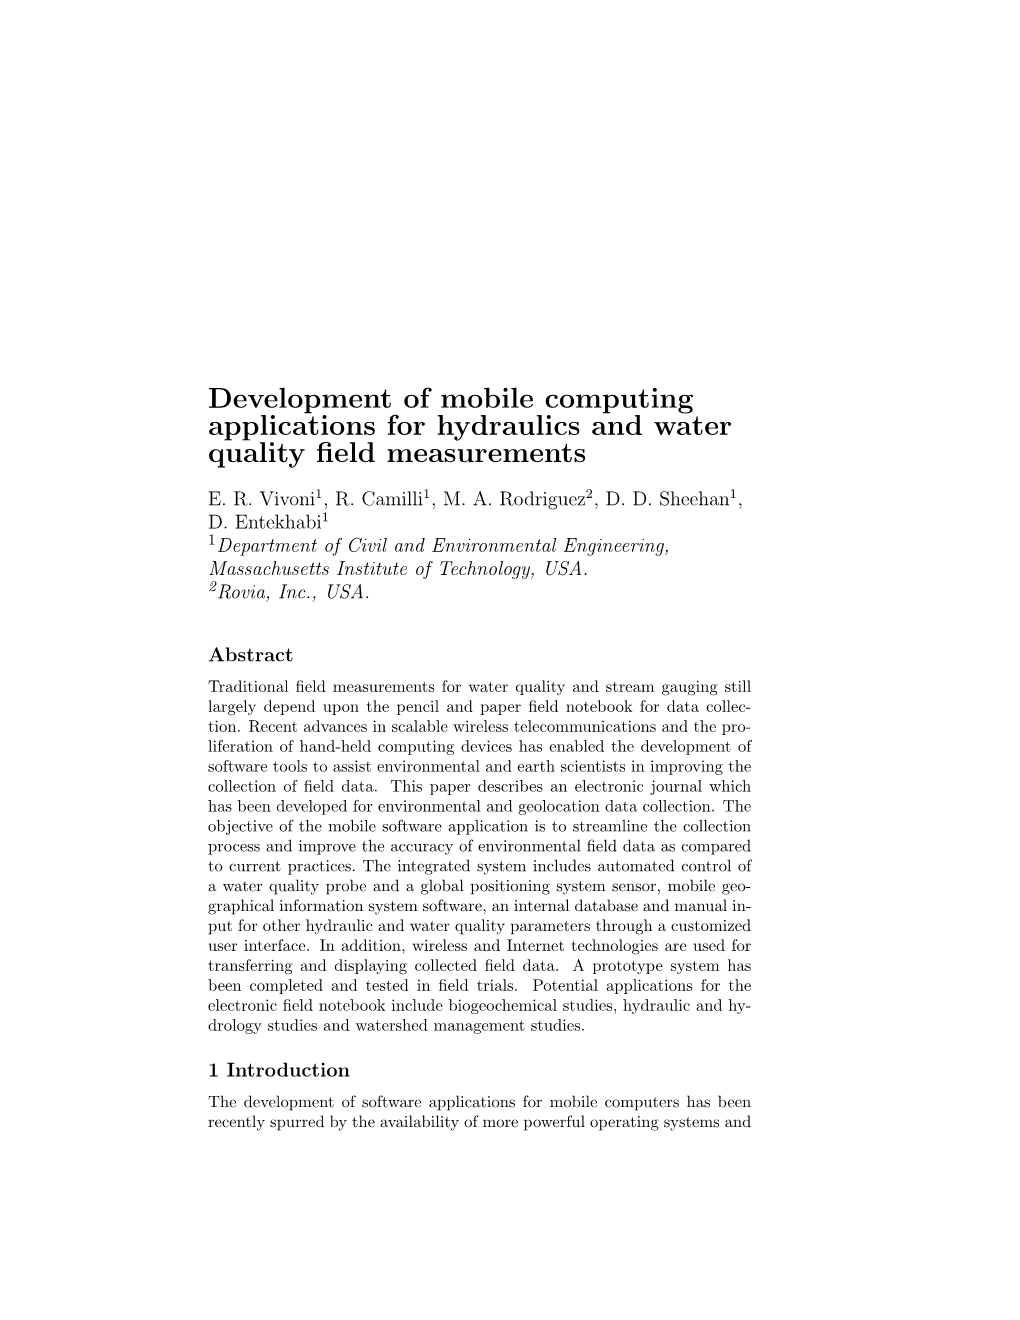 Development of Mobile Computing Applications for Hydraulics and Water Quality ﬁeld Measurements